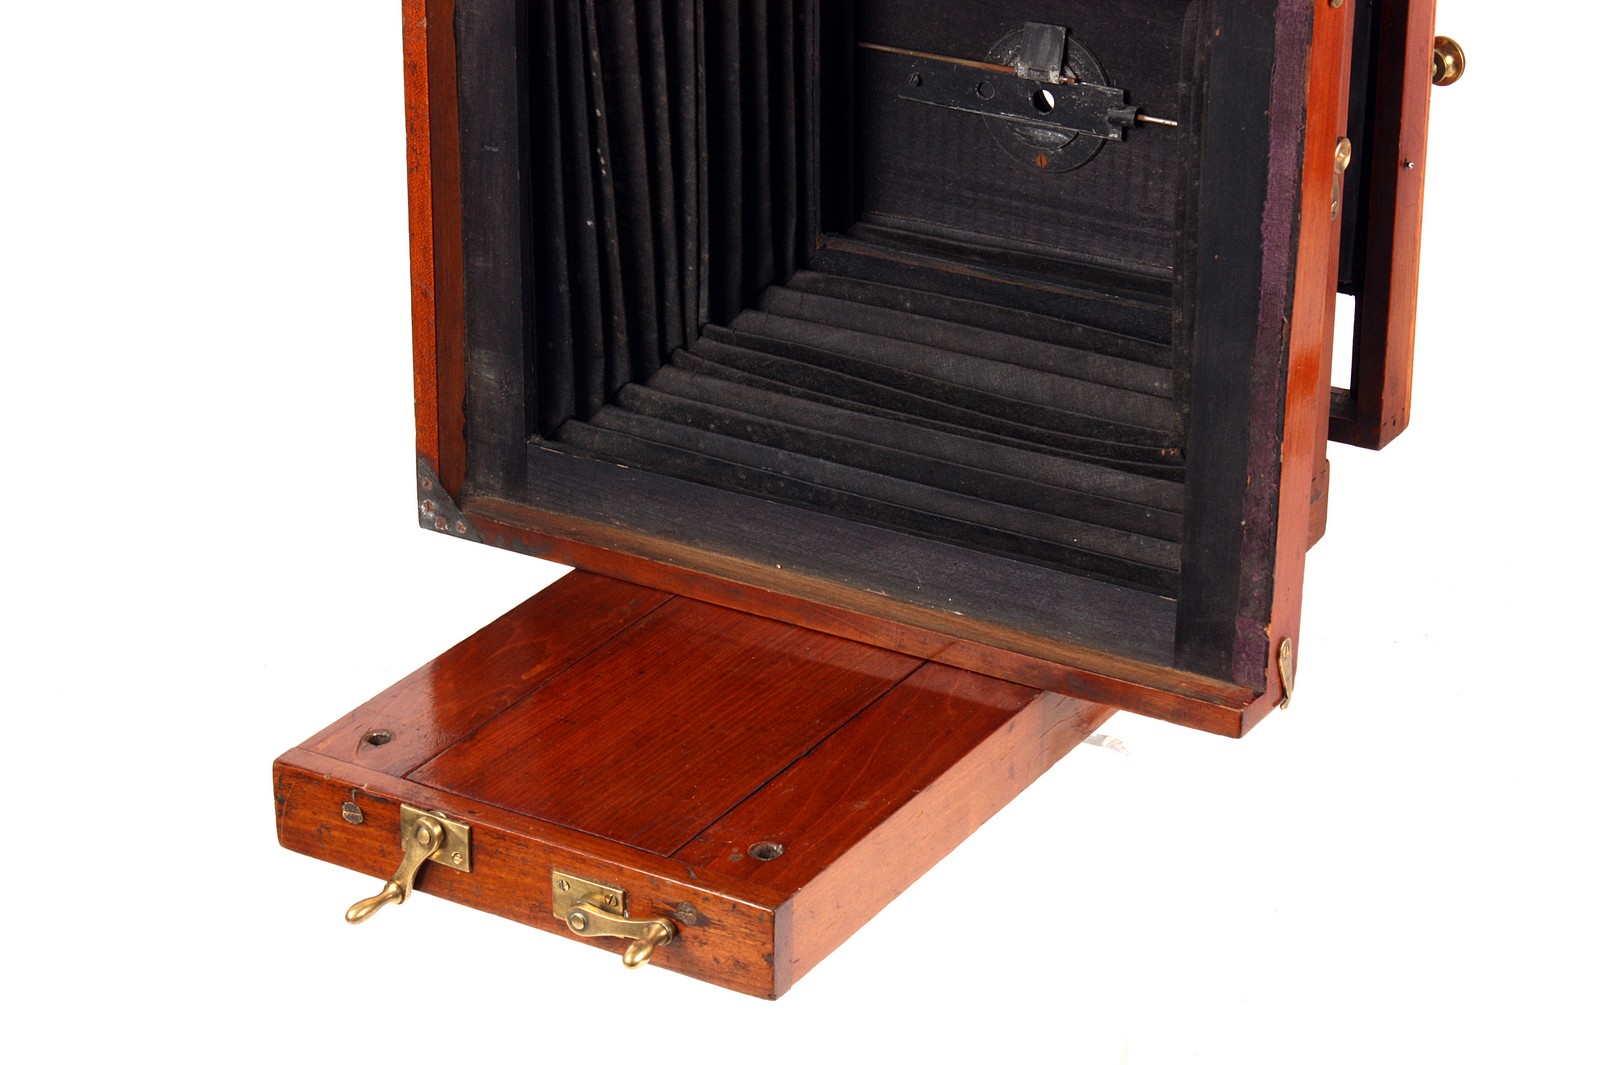 A J. Lancaster Mahogany Copy Camera, 10x8”, with unmarked dual-stop gate lens, body, G, front - Image 2 of 2